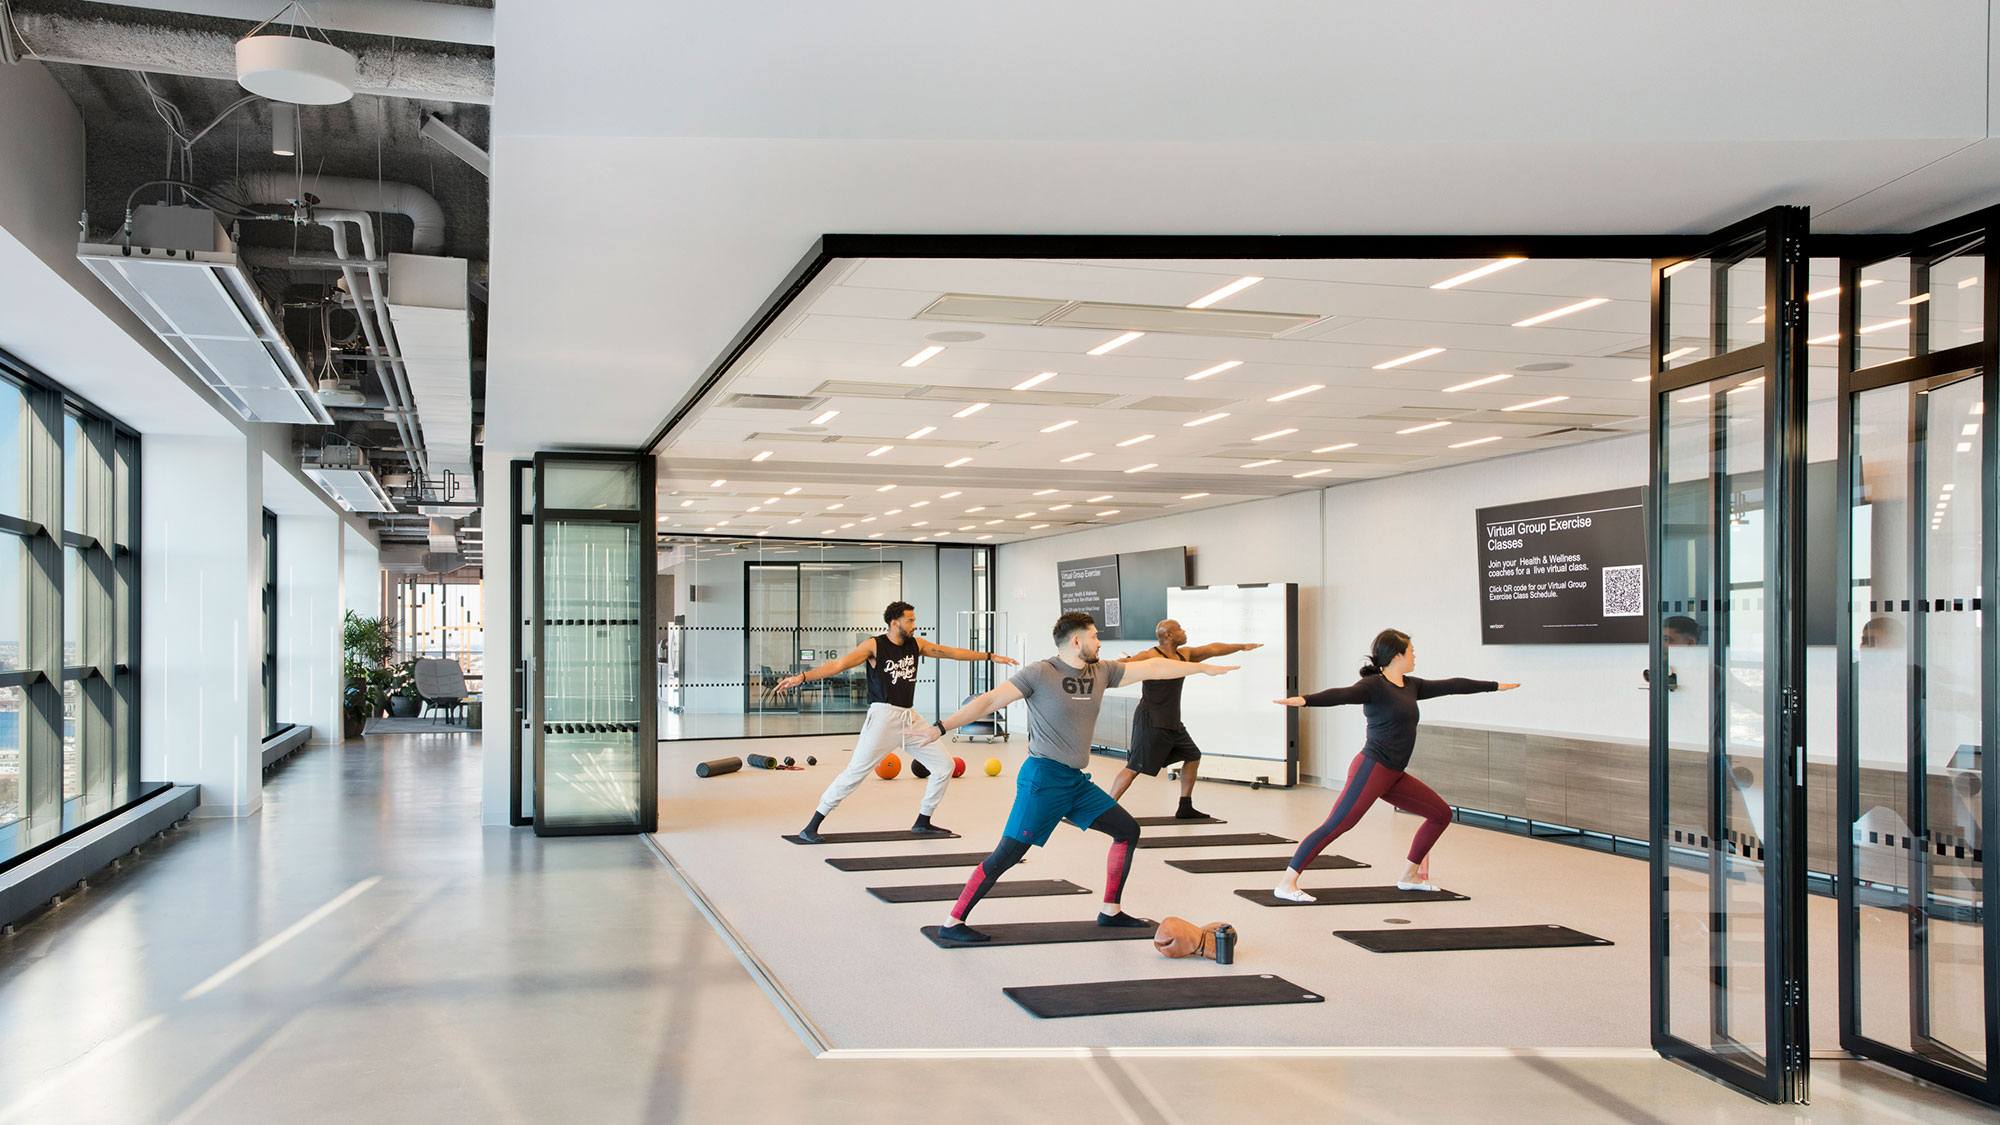 Verizon at The Hub, Boston office building. Photo: Connie Zhou, courtesy of Gensler.